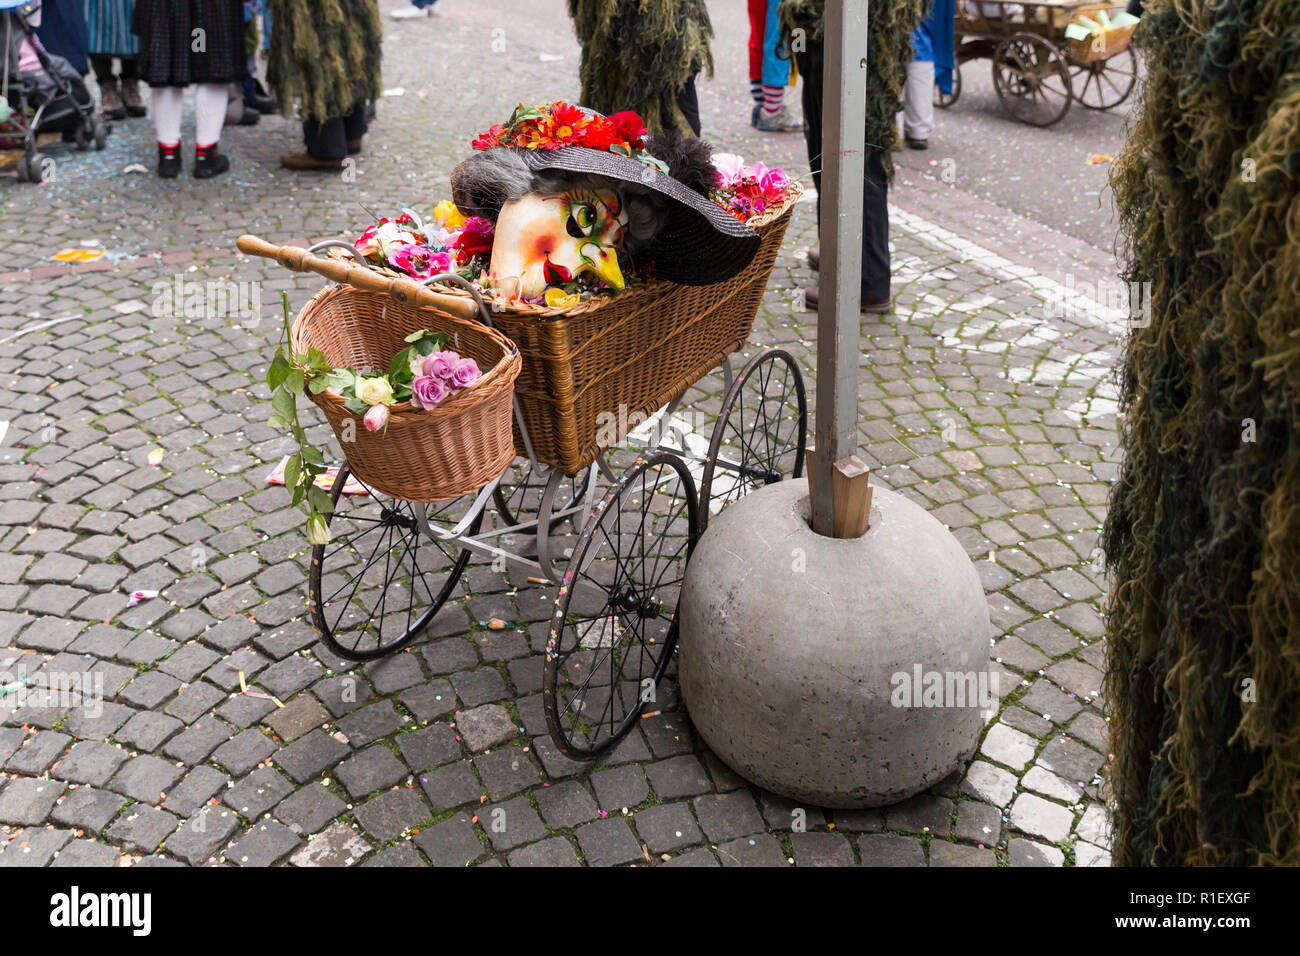 Basel carnival 2018. Schneidergasse, Basel, Switzerland - February 19th, 2018. An old style baby buggy with a carnival mask belonging to an alti dande Stock Photo